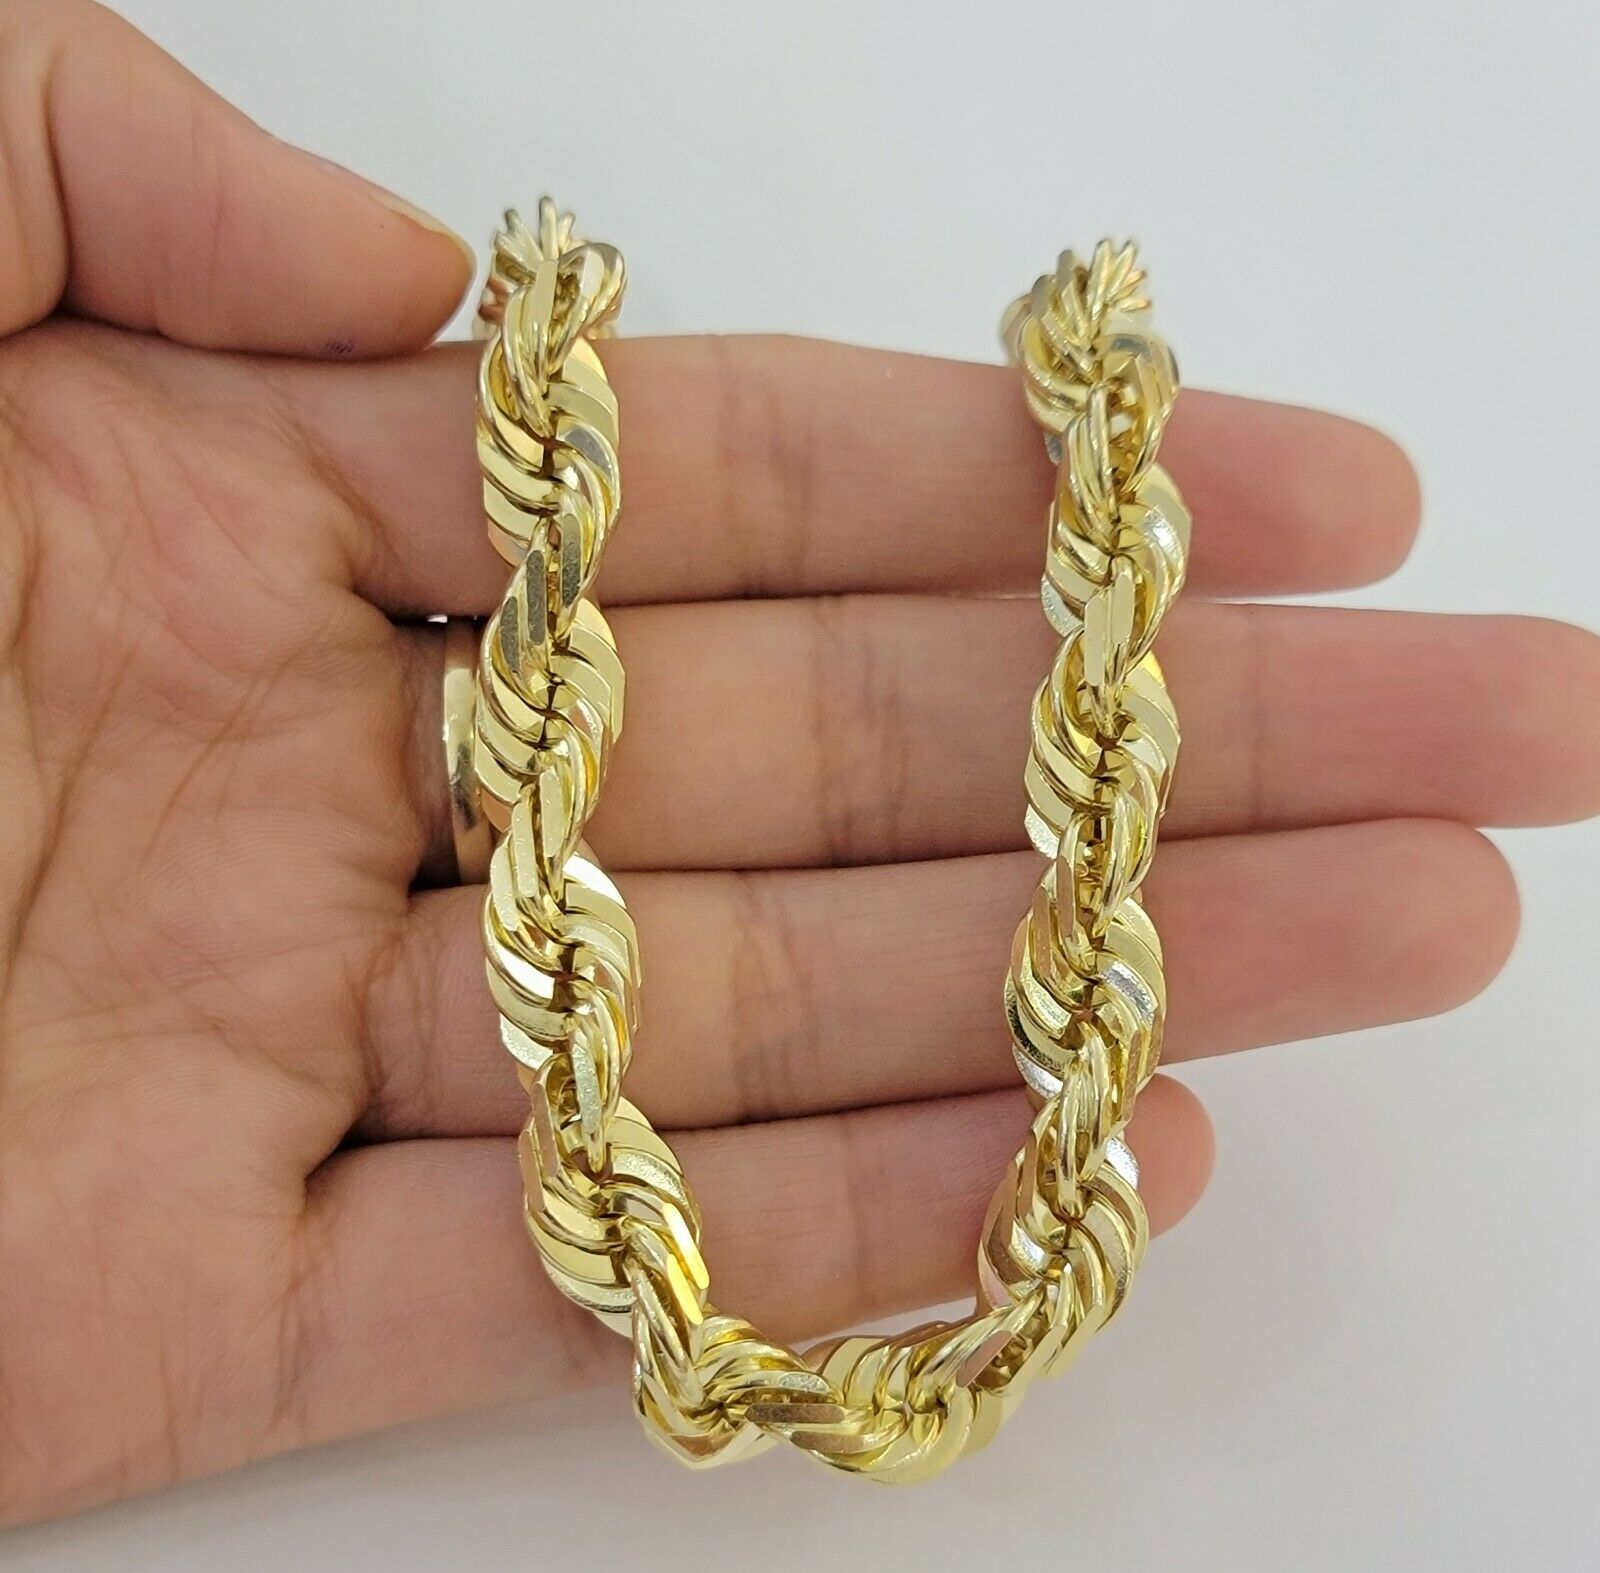 Solid 10k Real Gold Rope Bracelet Mens 10mm 8" Inch 10kt Yellow Gold THICK&HEAVY